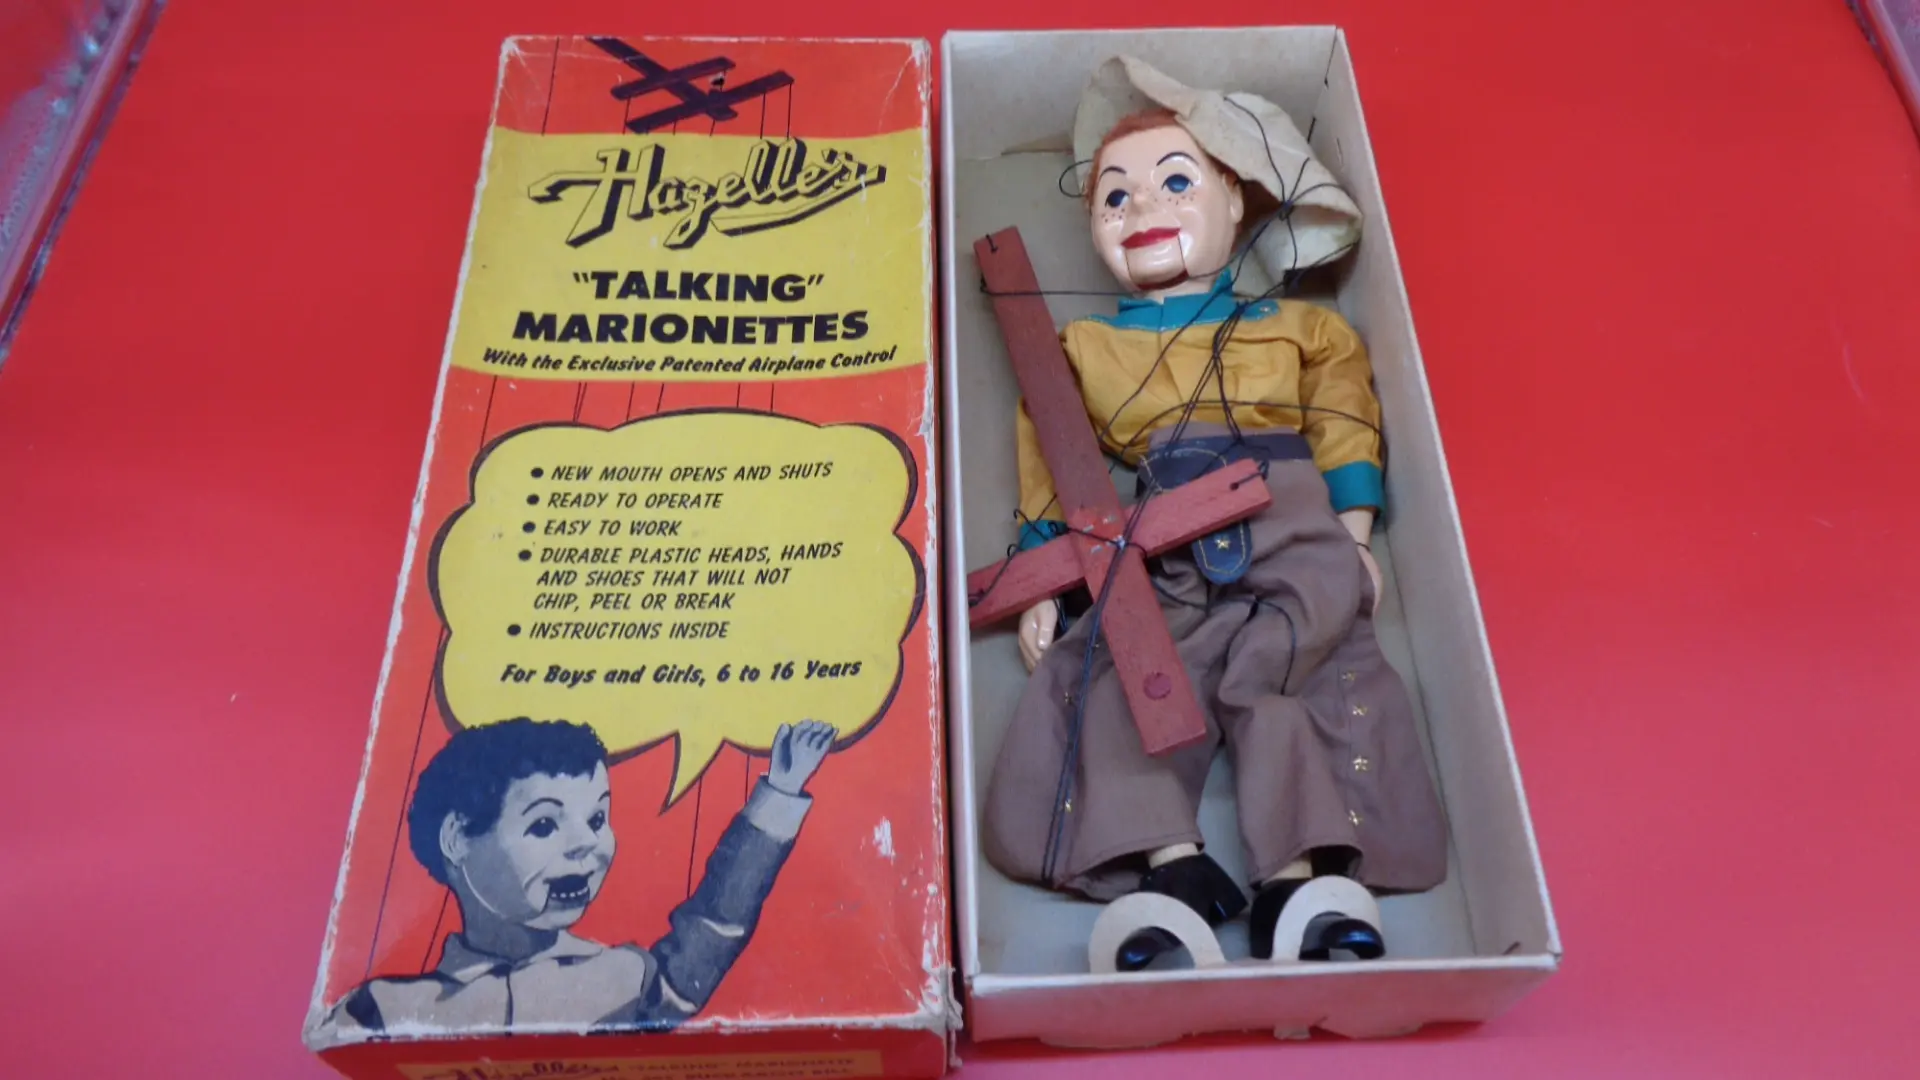 Hazelle's, Talking Marionettes Puppet Doll with Original Box, open